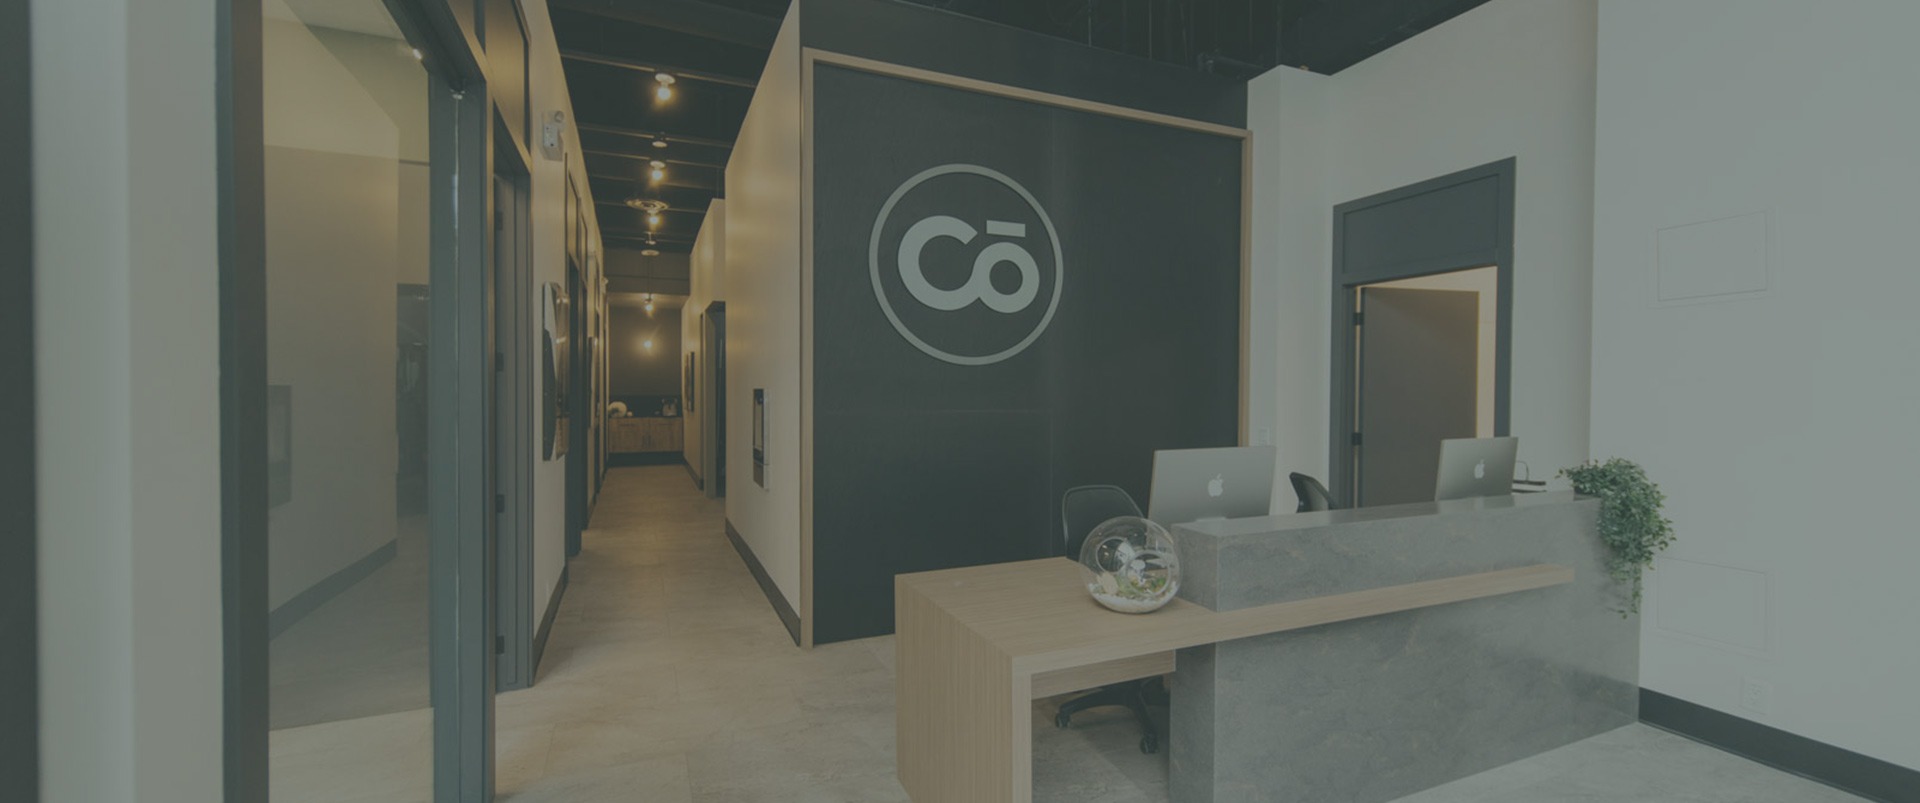 We Welcome all New Patients | CōLAB Health & Body | Chiropractic & Wellness Clinic | Downtown Calgary, AB